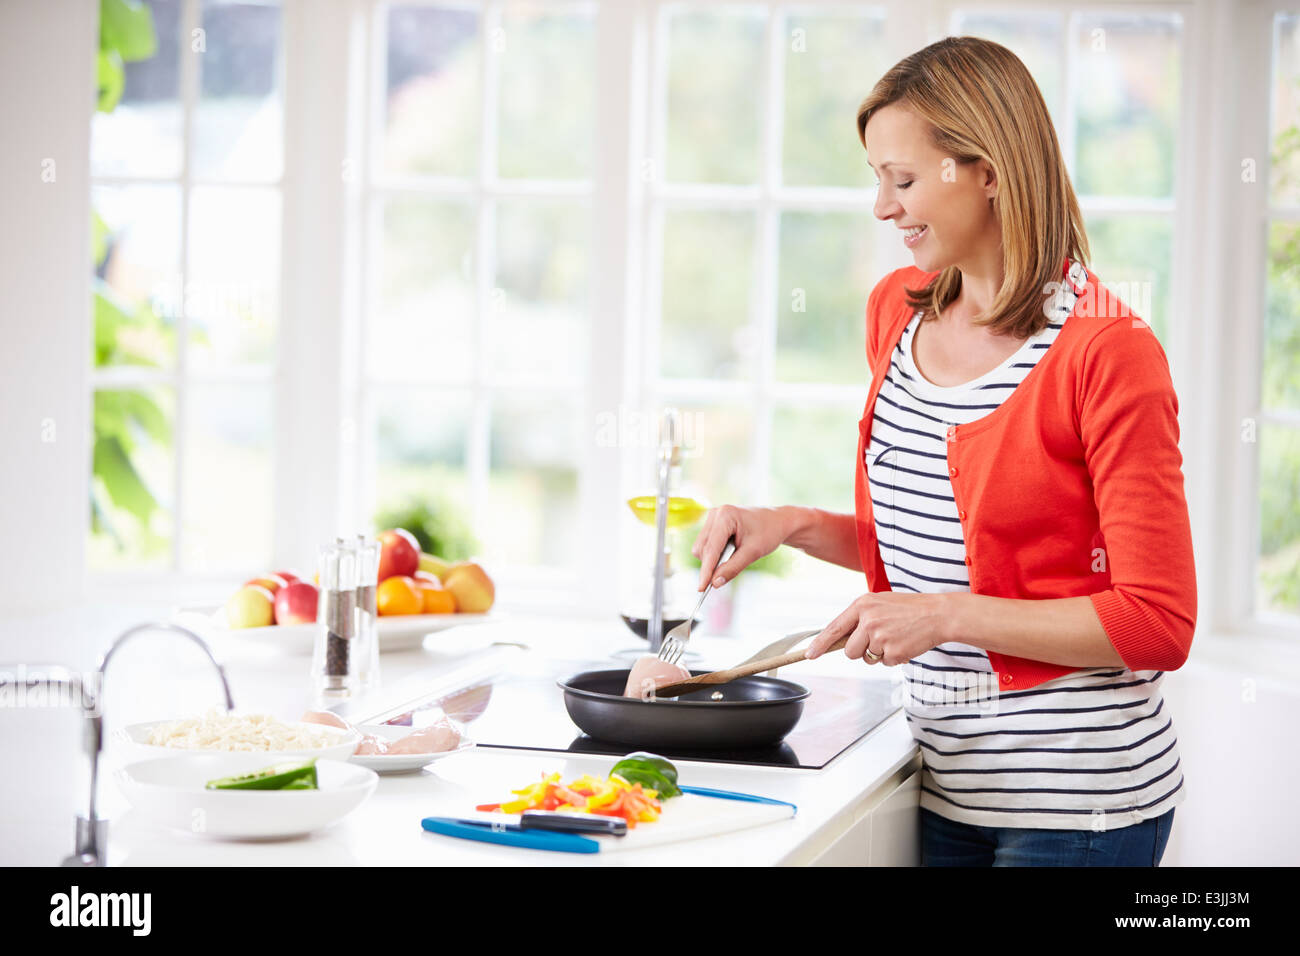 Woman Standing At Hob Preparing Meal In Kitchen Stock Photo